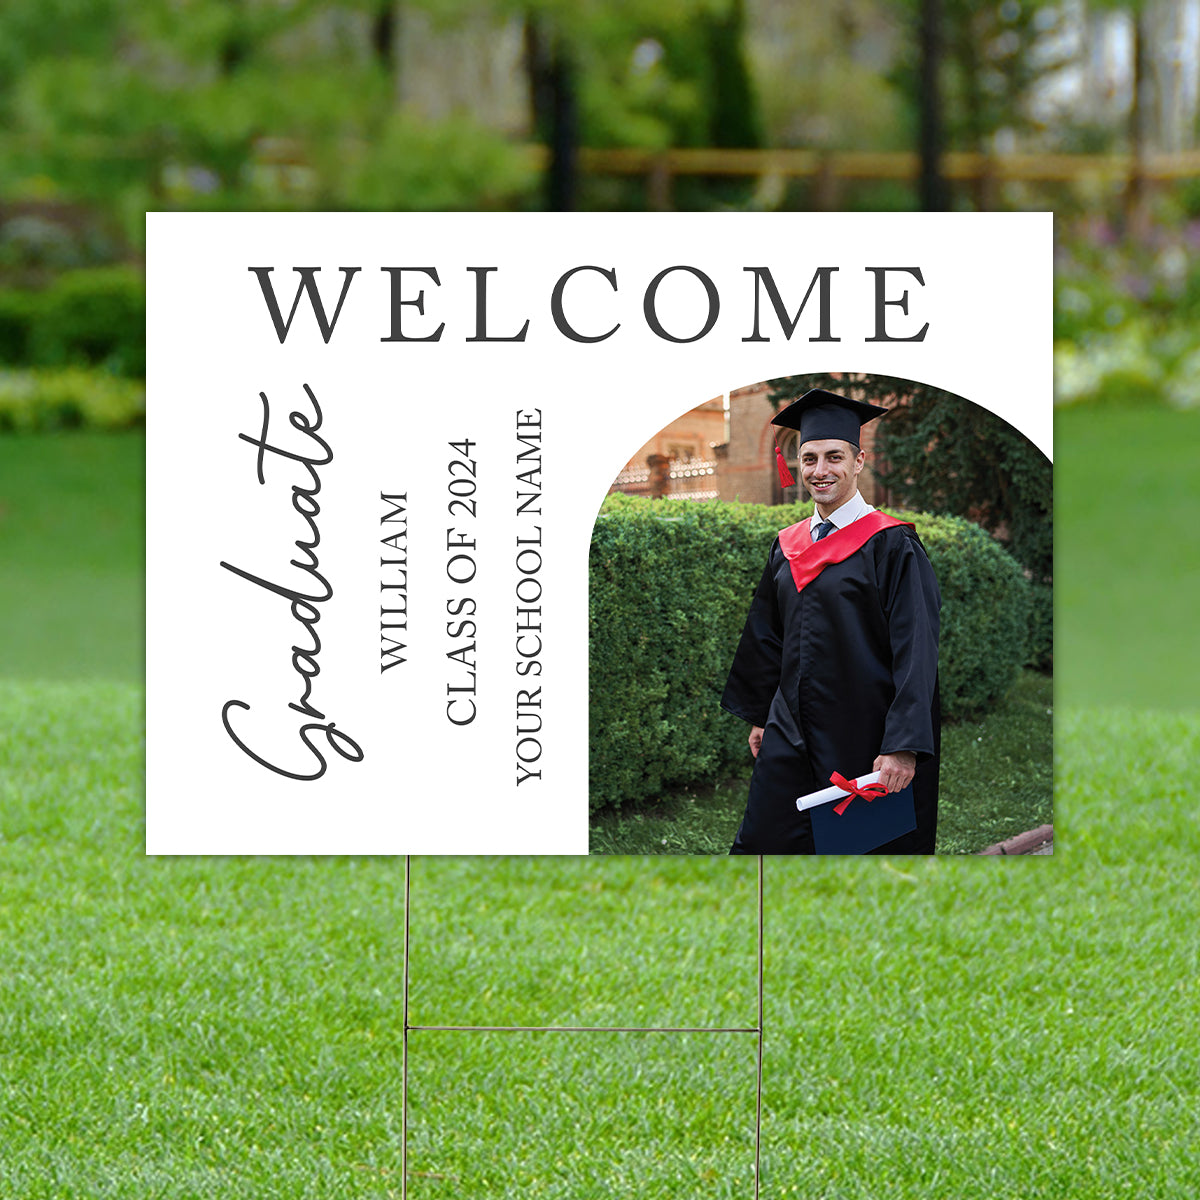 Welcome Graduate, Custom Photo And Texts Graduation - Personalized Lawn Sign, Yard Sign, Graduation Gift